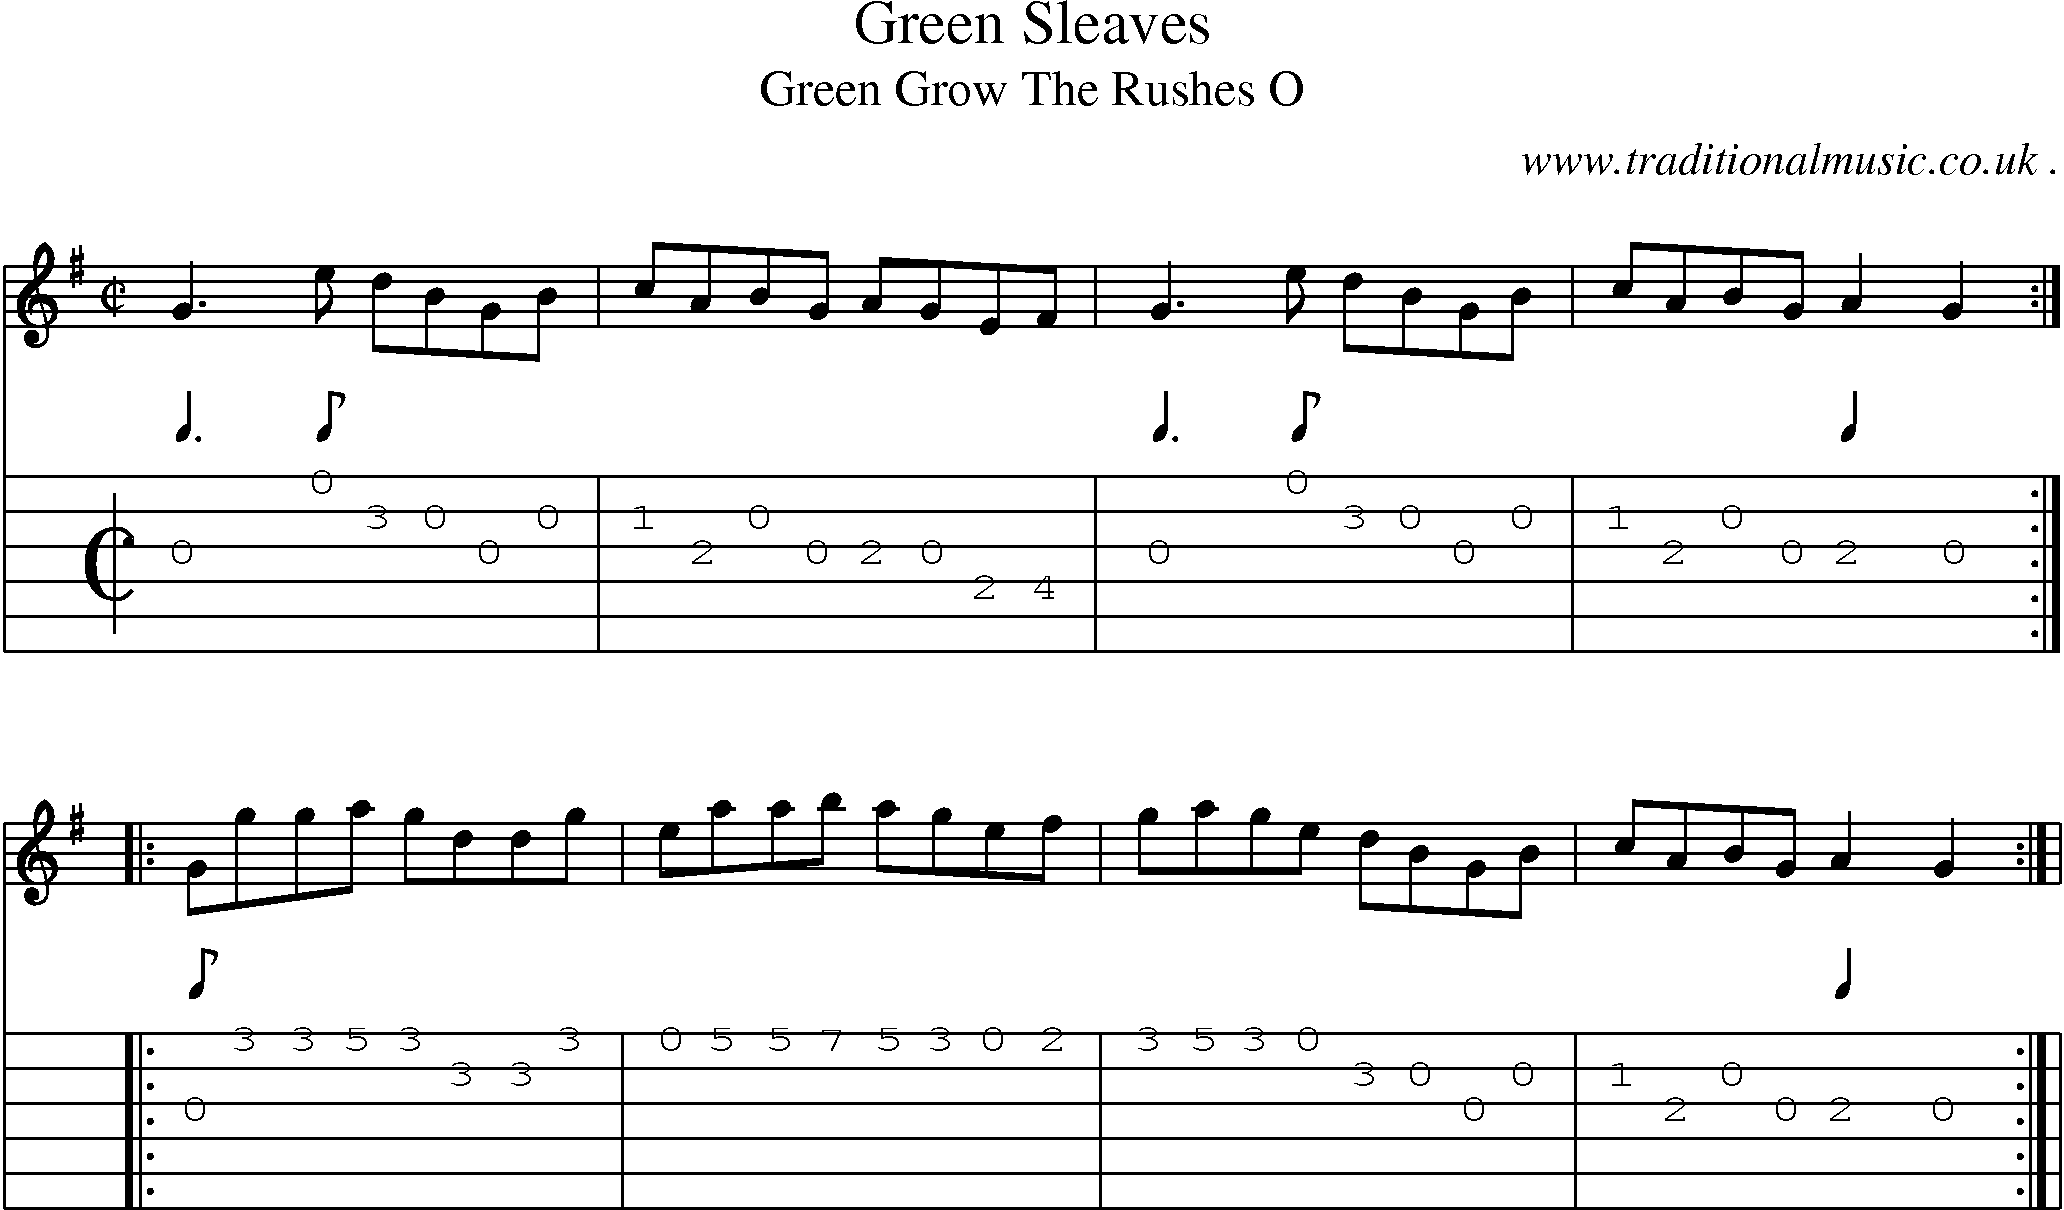 Sheet-Music and Guitar Tabs for Green Sleaves